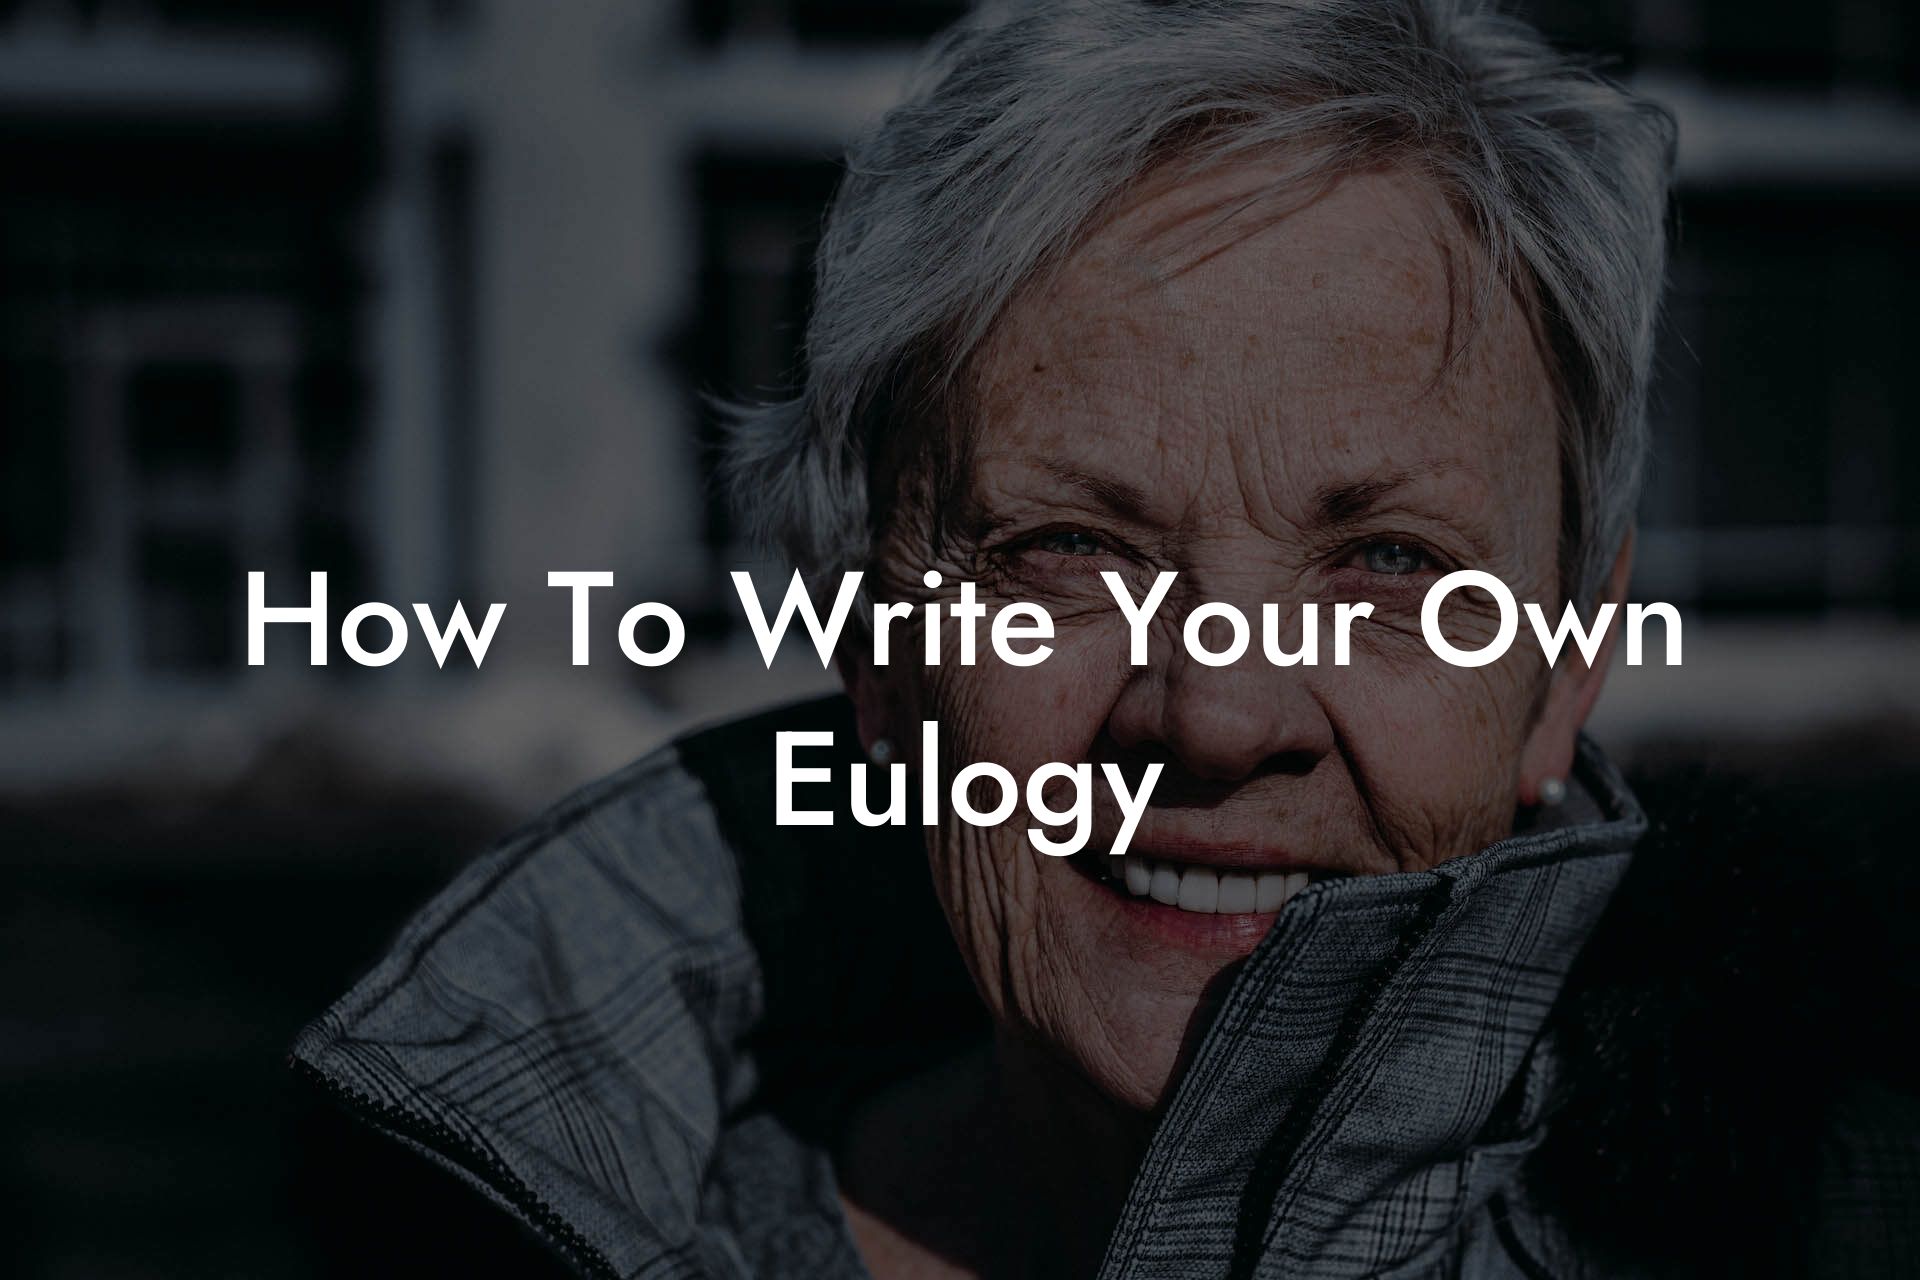 How To Write Your Own Eulogy